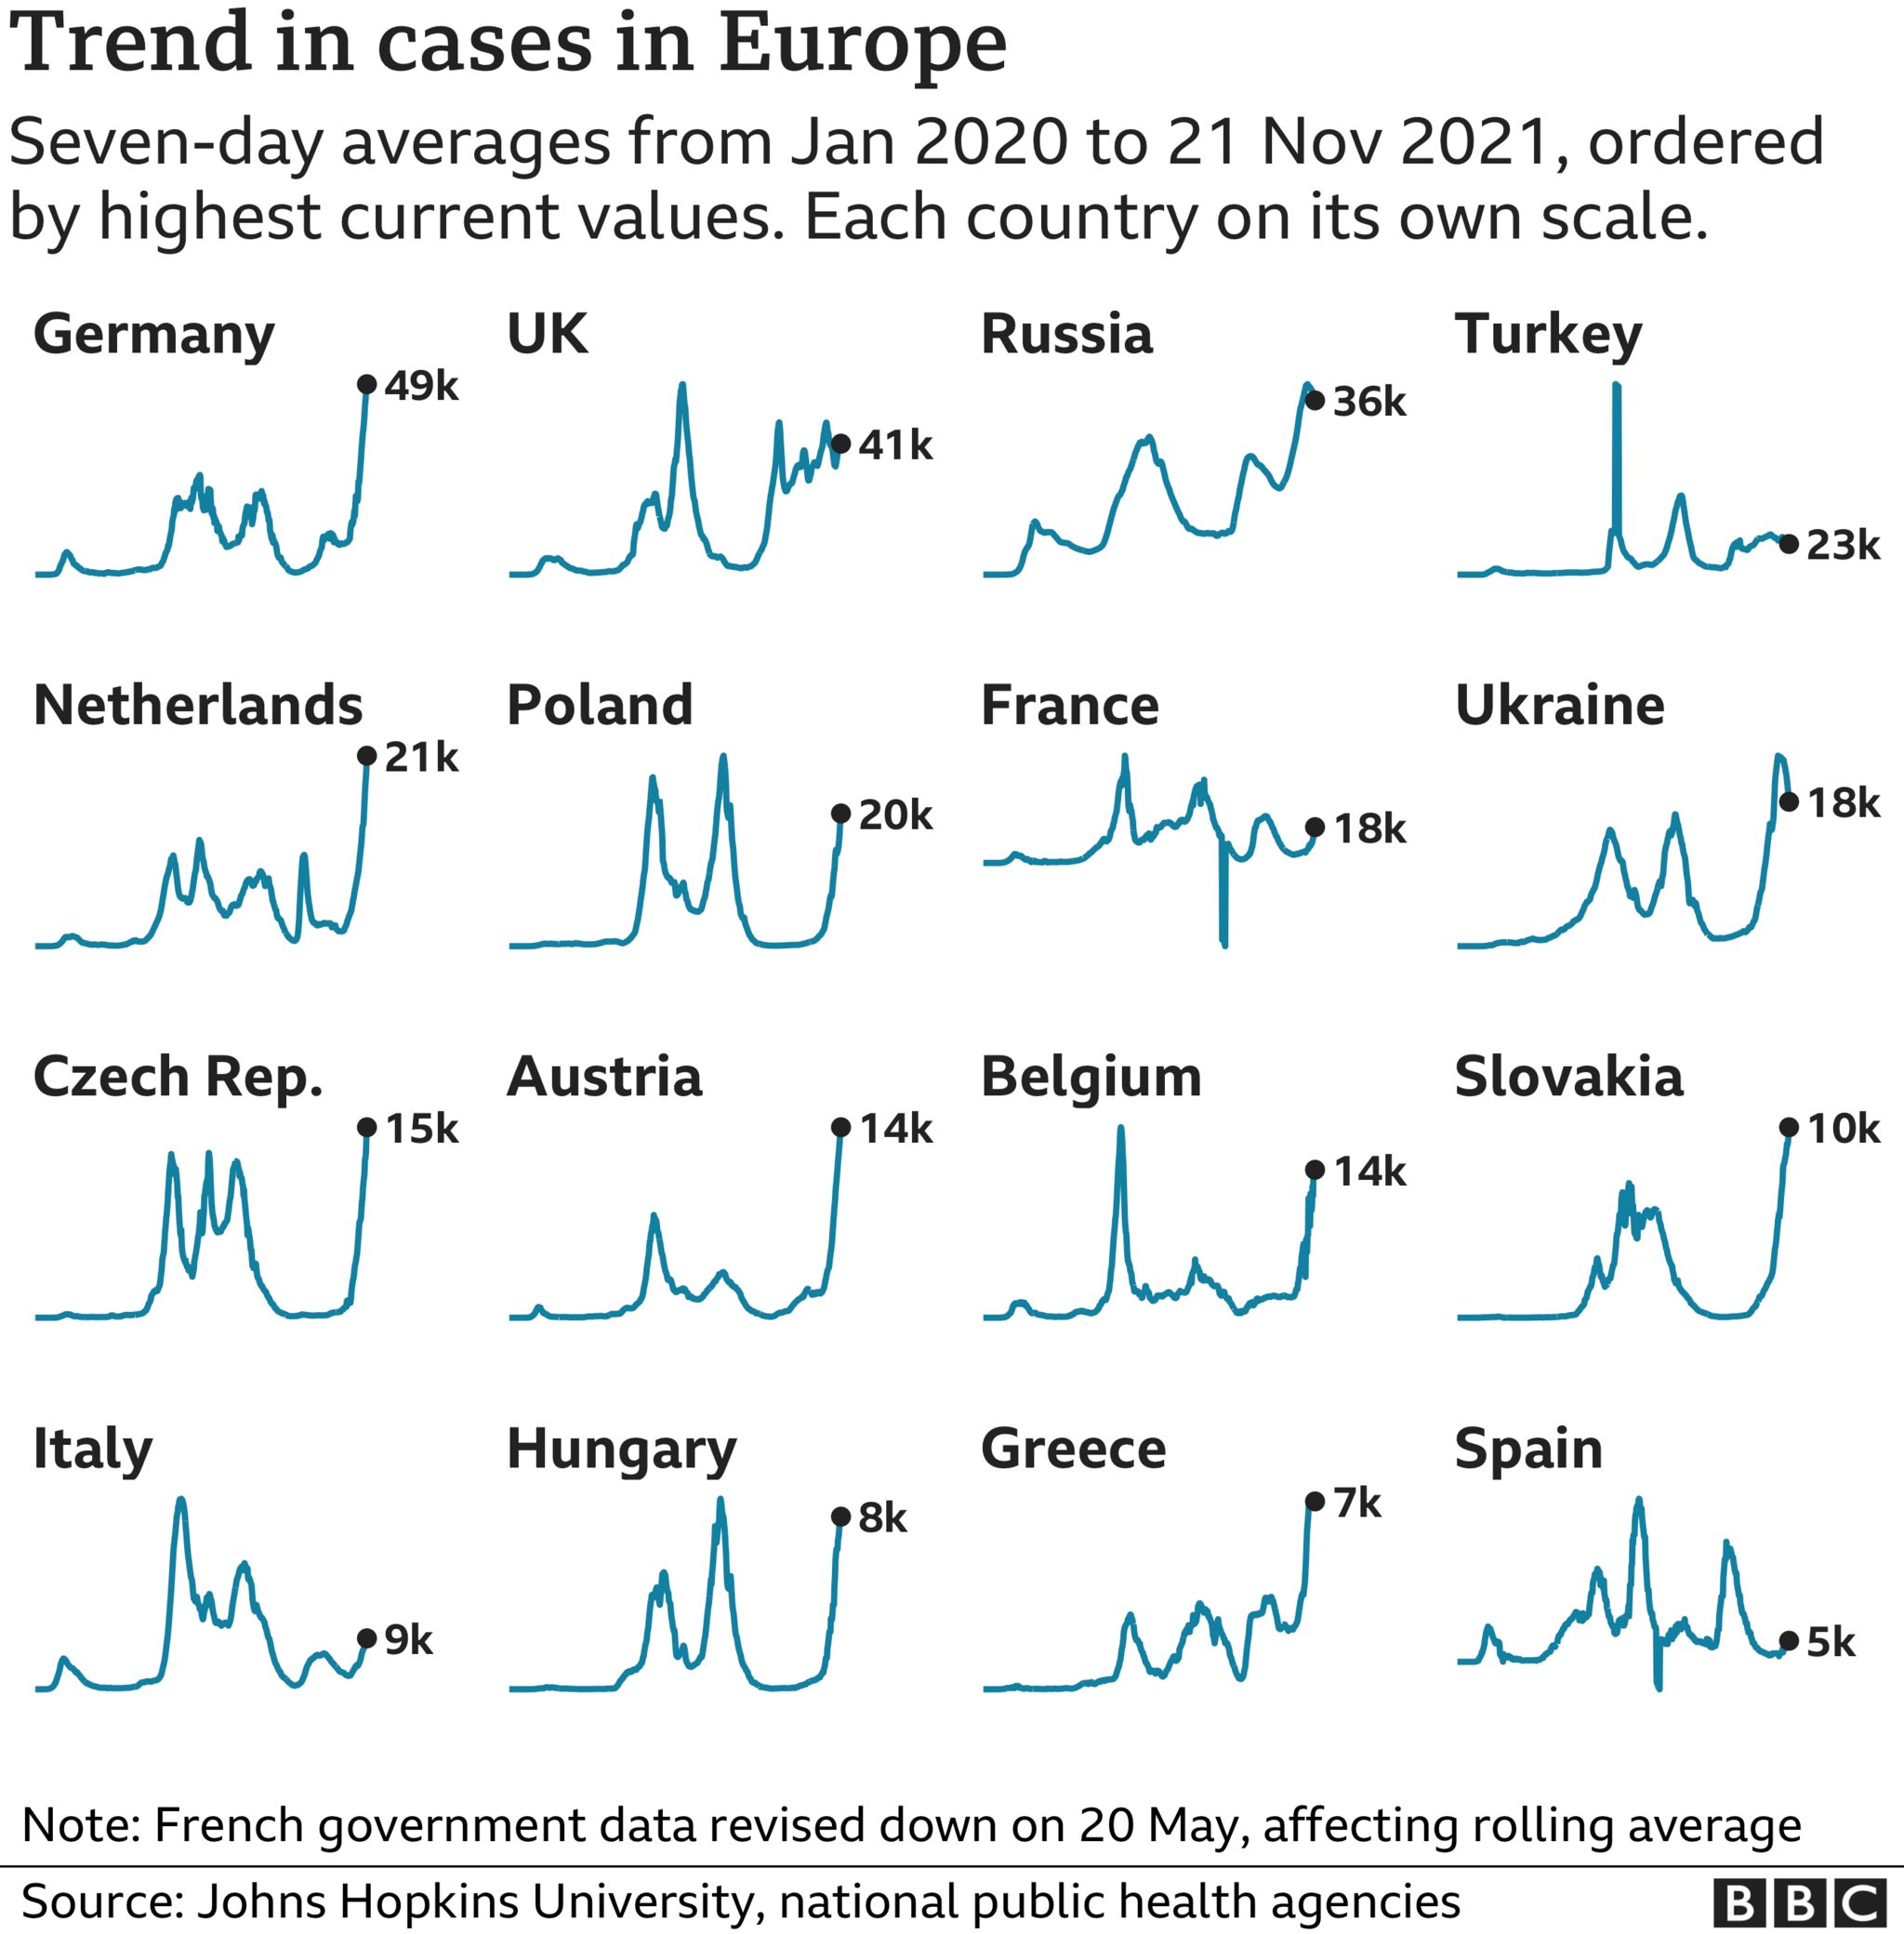 BBC made graph showing the trends of cases in Europe